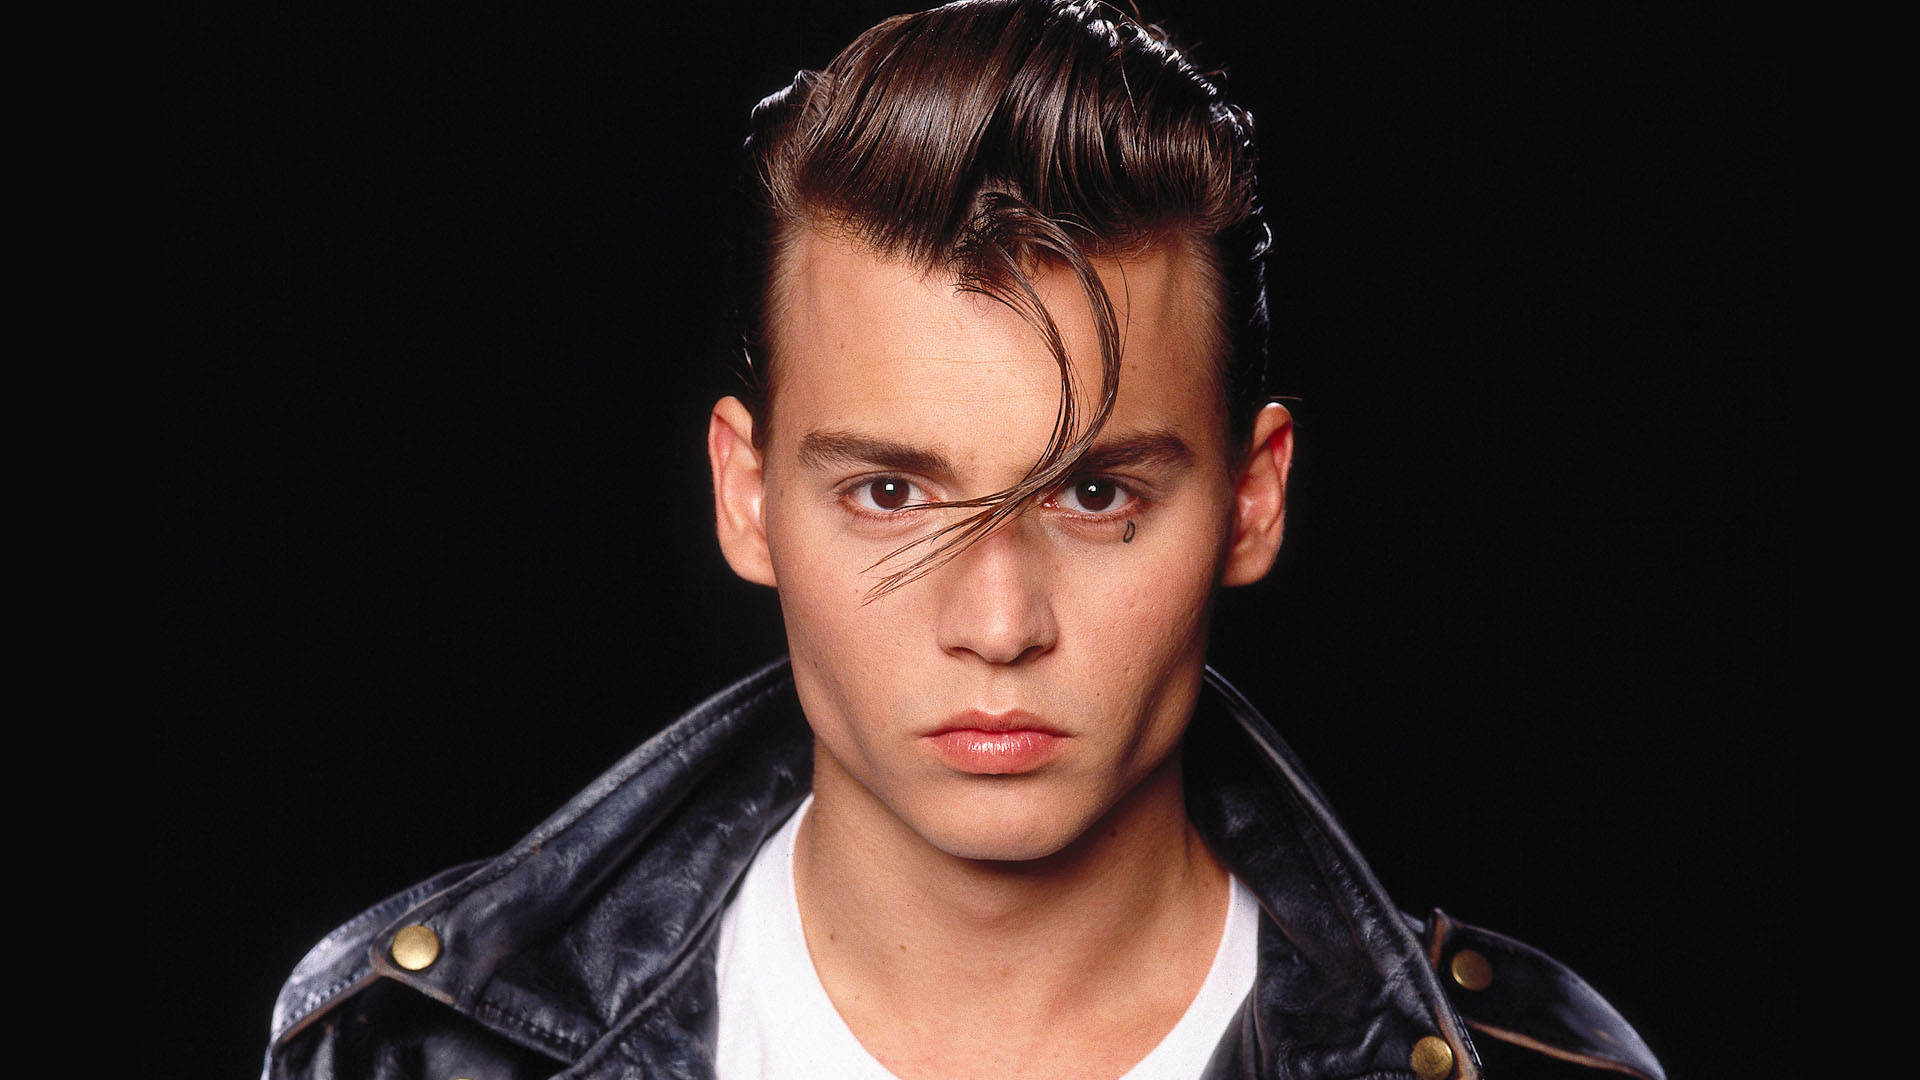 Young Johnny Depp Wallpaper High Definition Quality